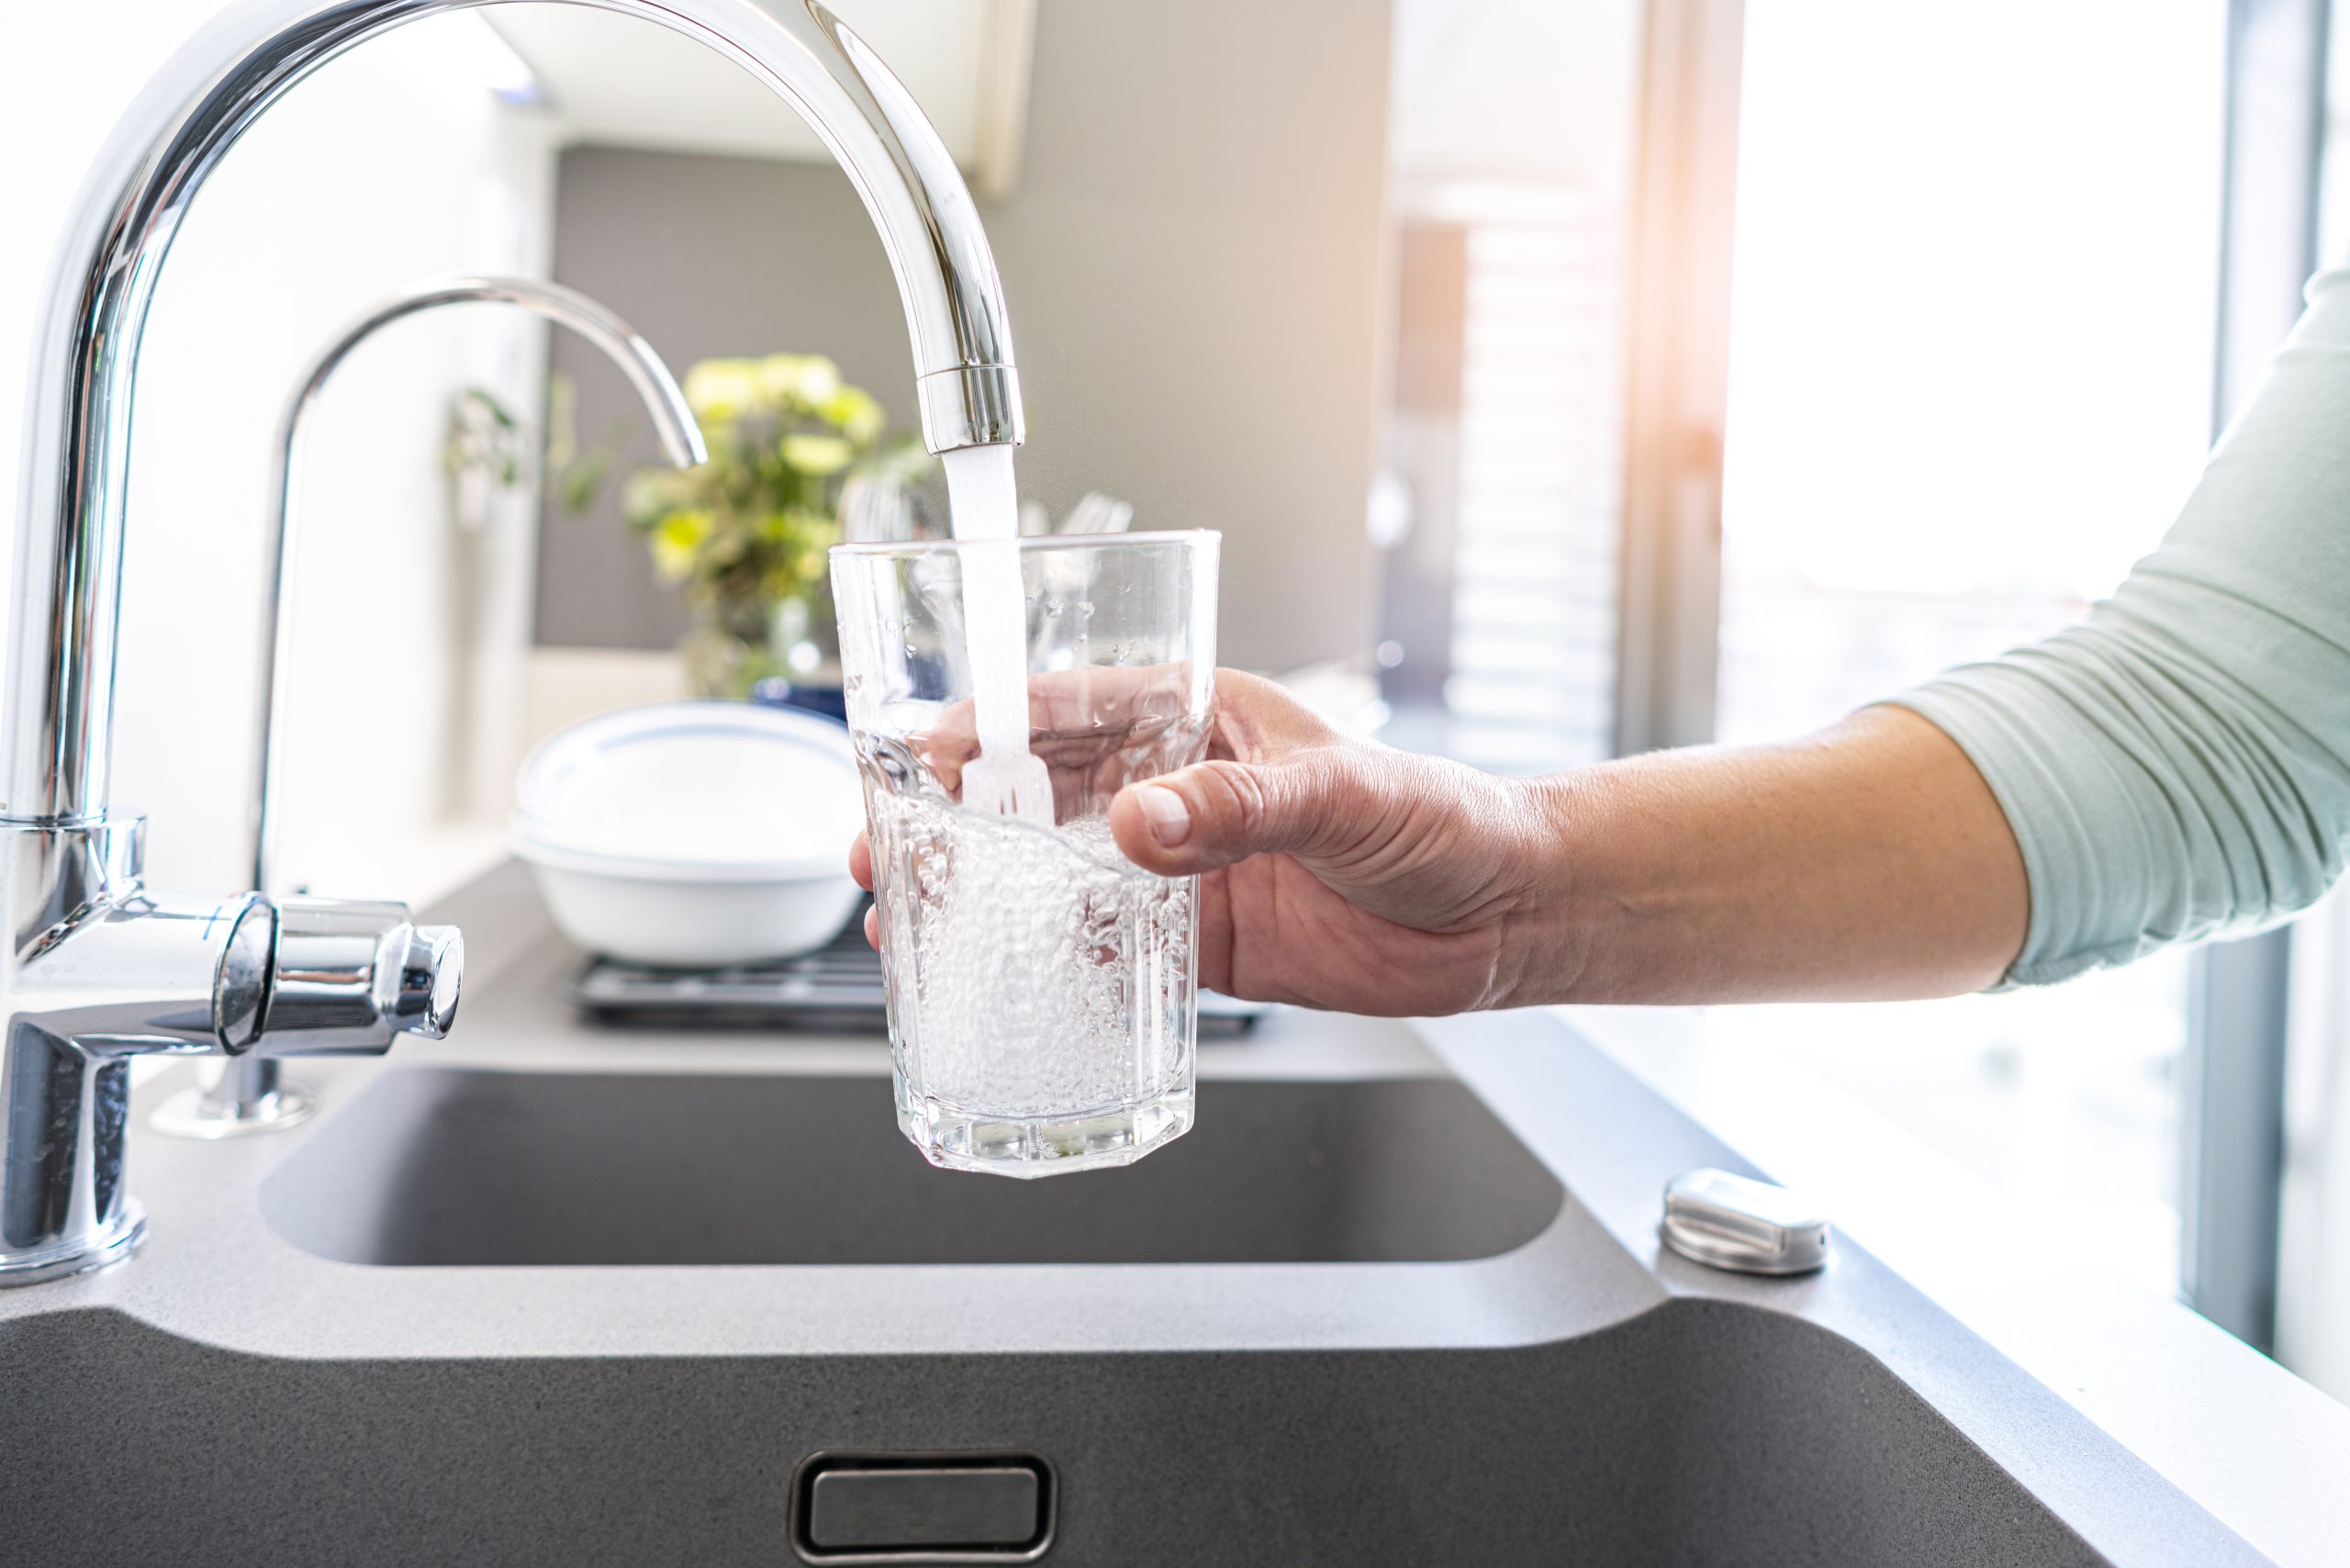 Harmful chemicals found in nearly half of US tap water: Study [Video]